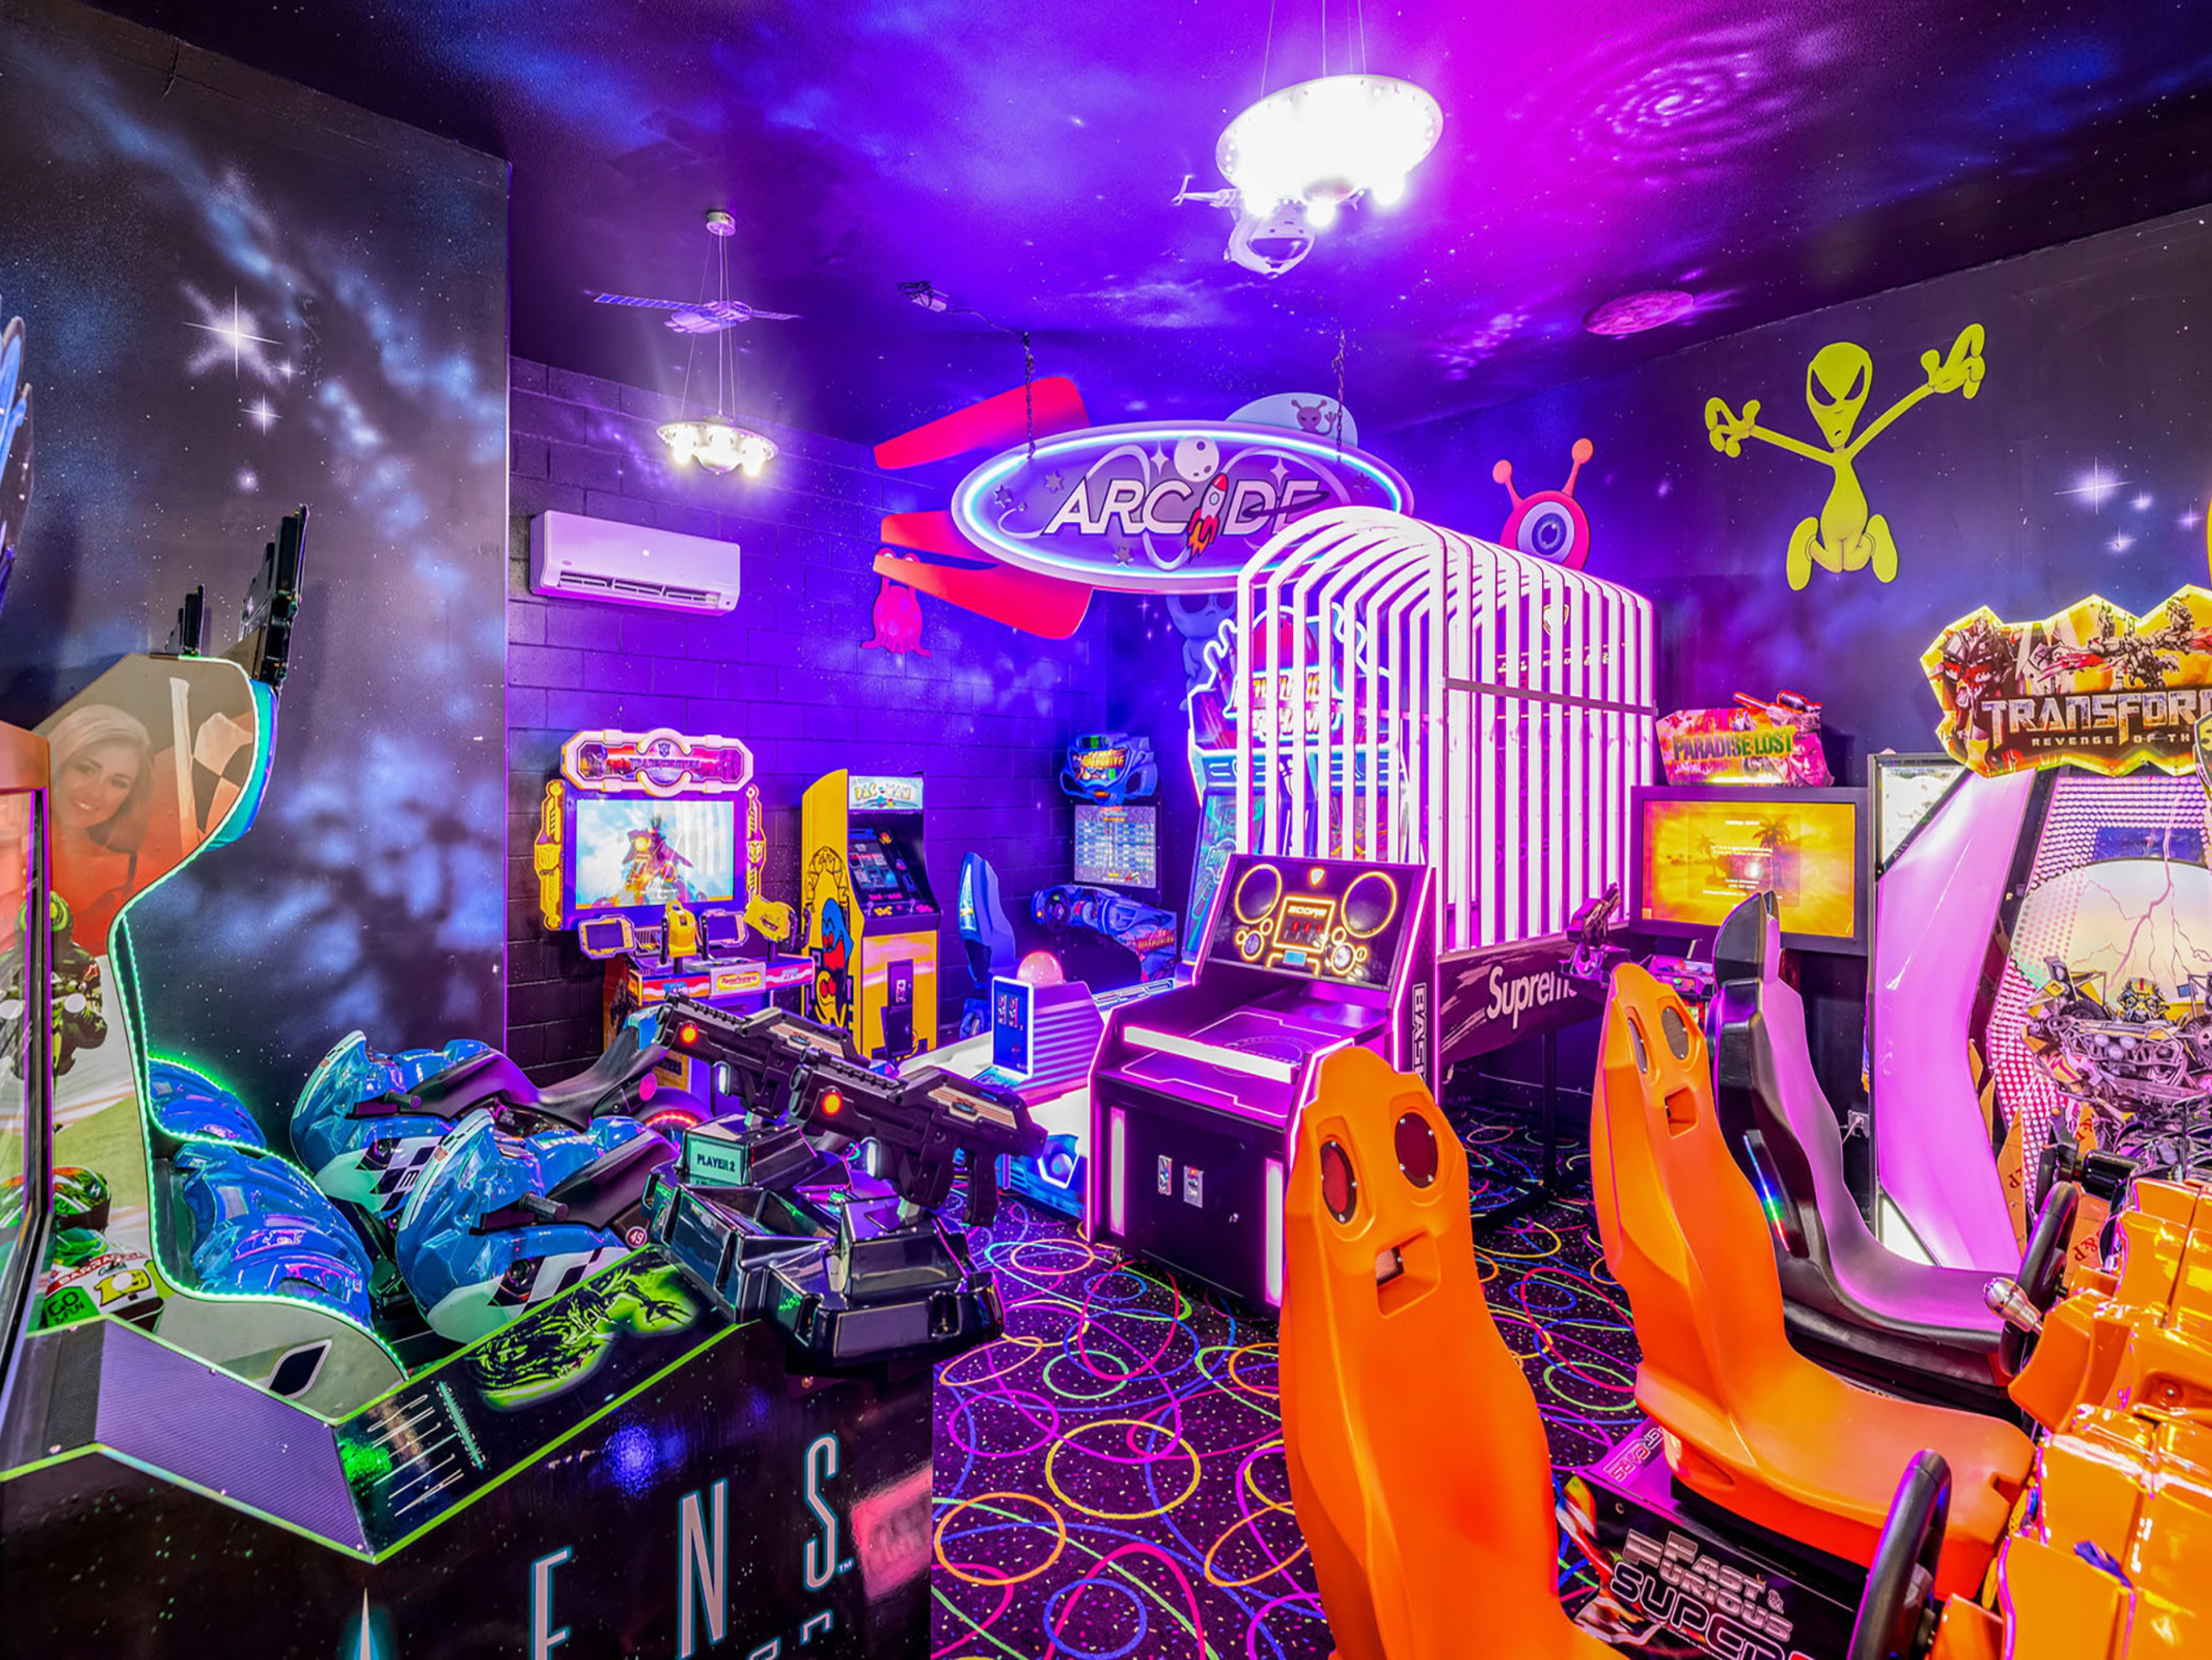 Reunion Resort 8000 rentals with games rooms for large groups